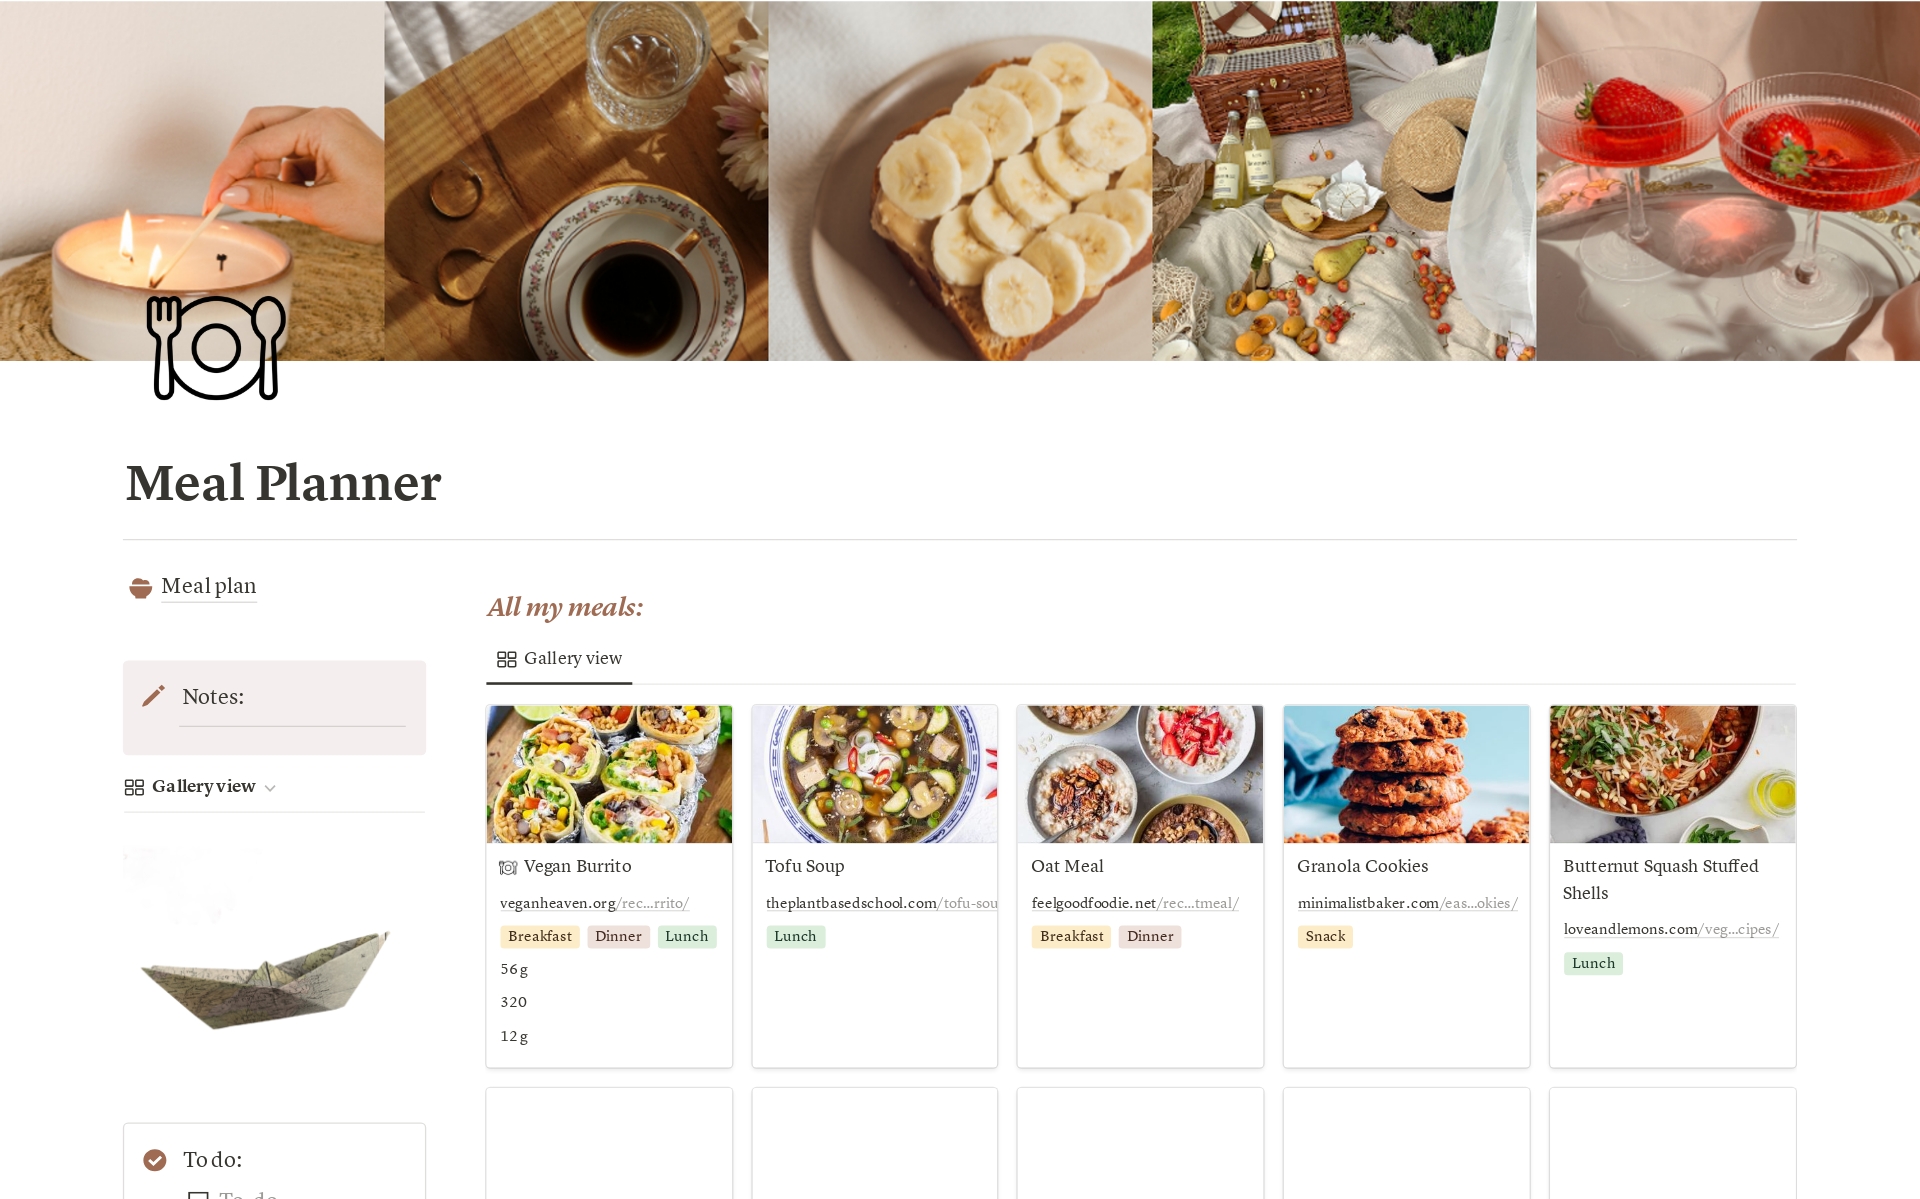 your ultimate companion in the journey towards healthier, more organized eating. This innovative meal planning tool seamlessly combines the power of Notion, a versatile productivity platform, with the art of crafting delicious, balanced meals.